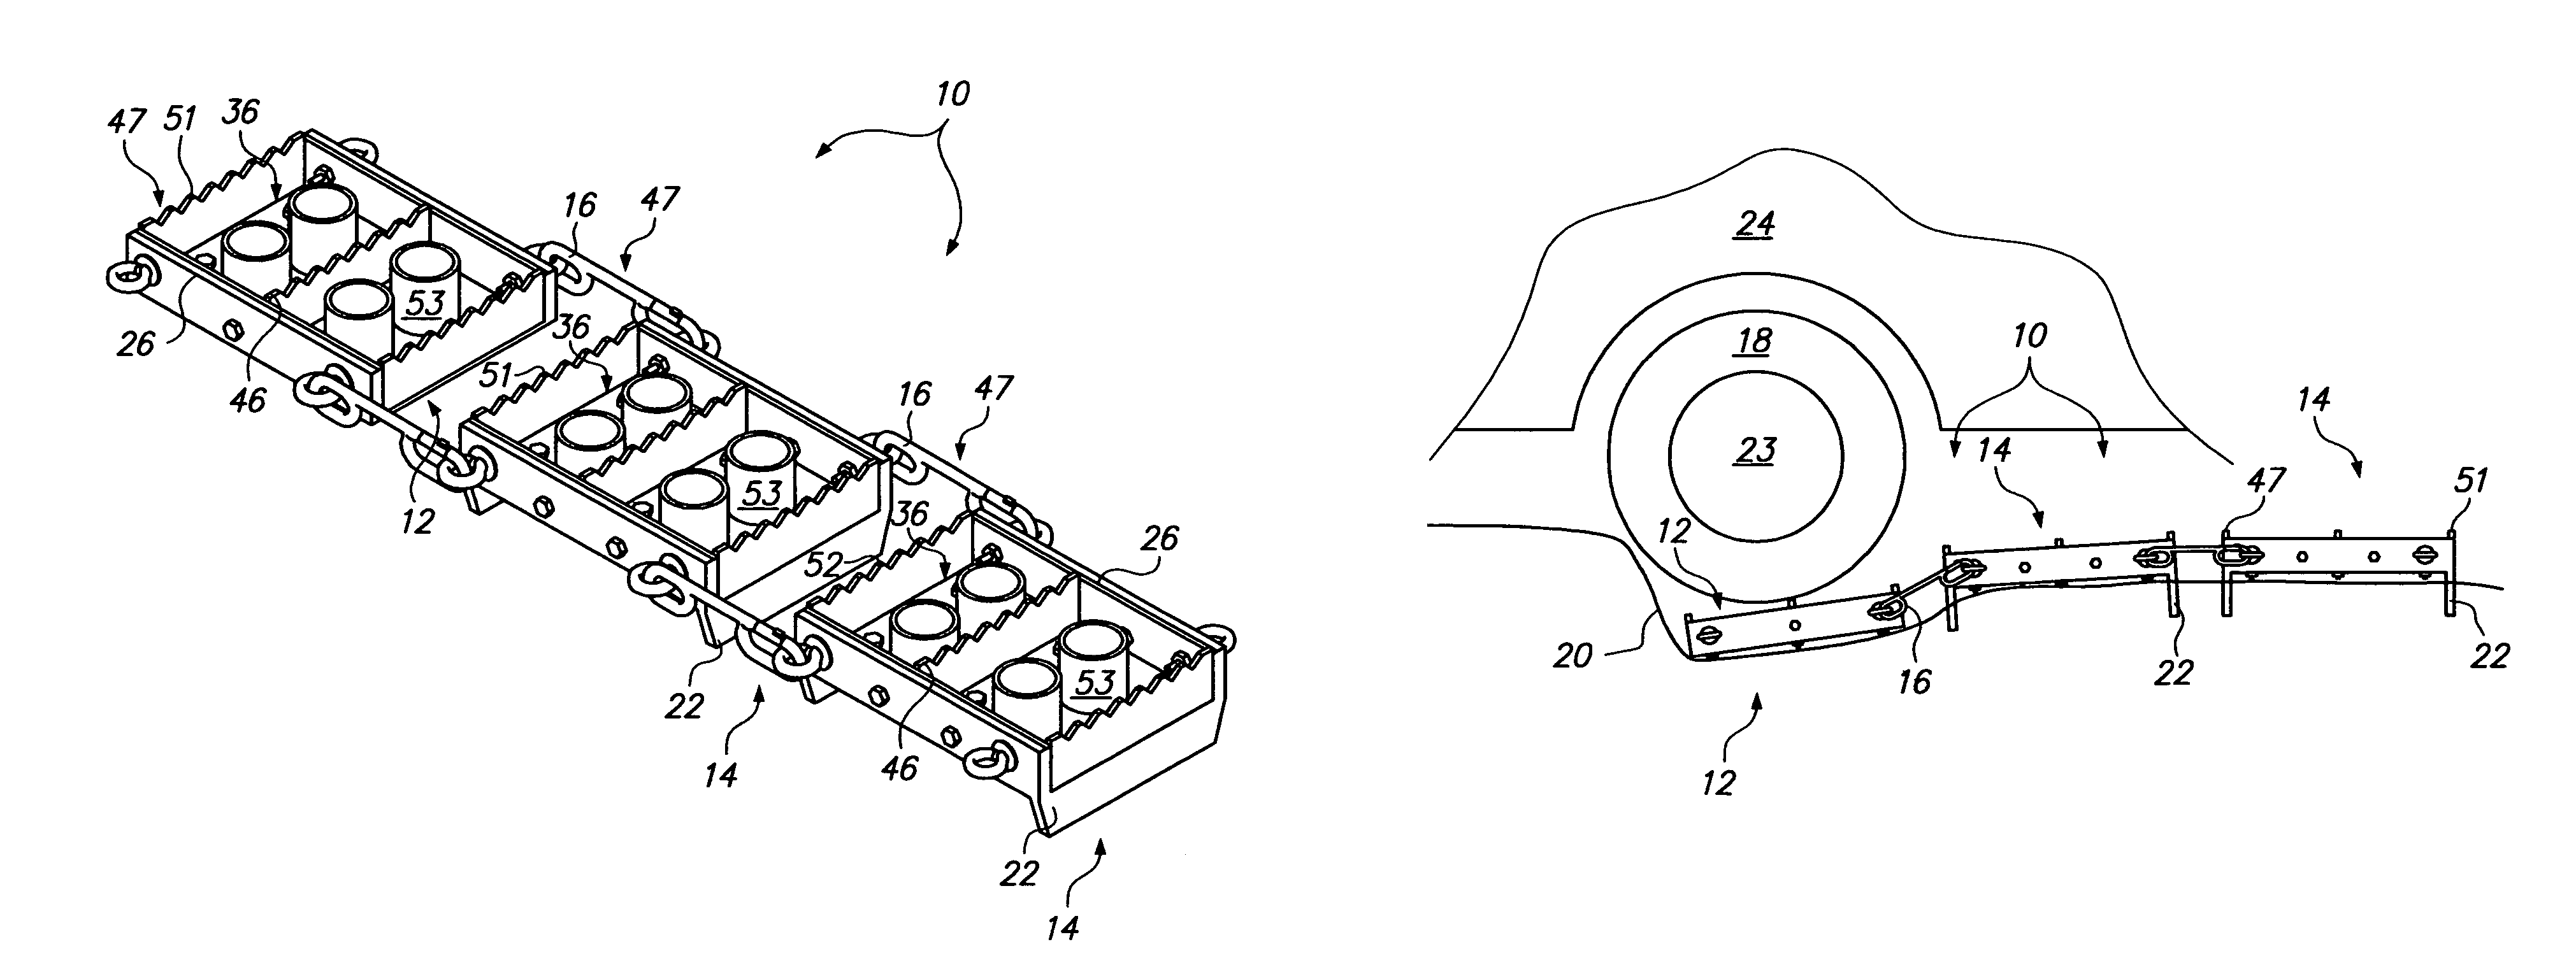 Vehicle traction device